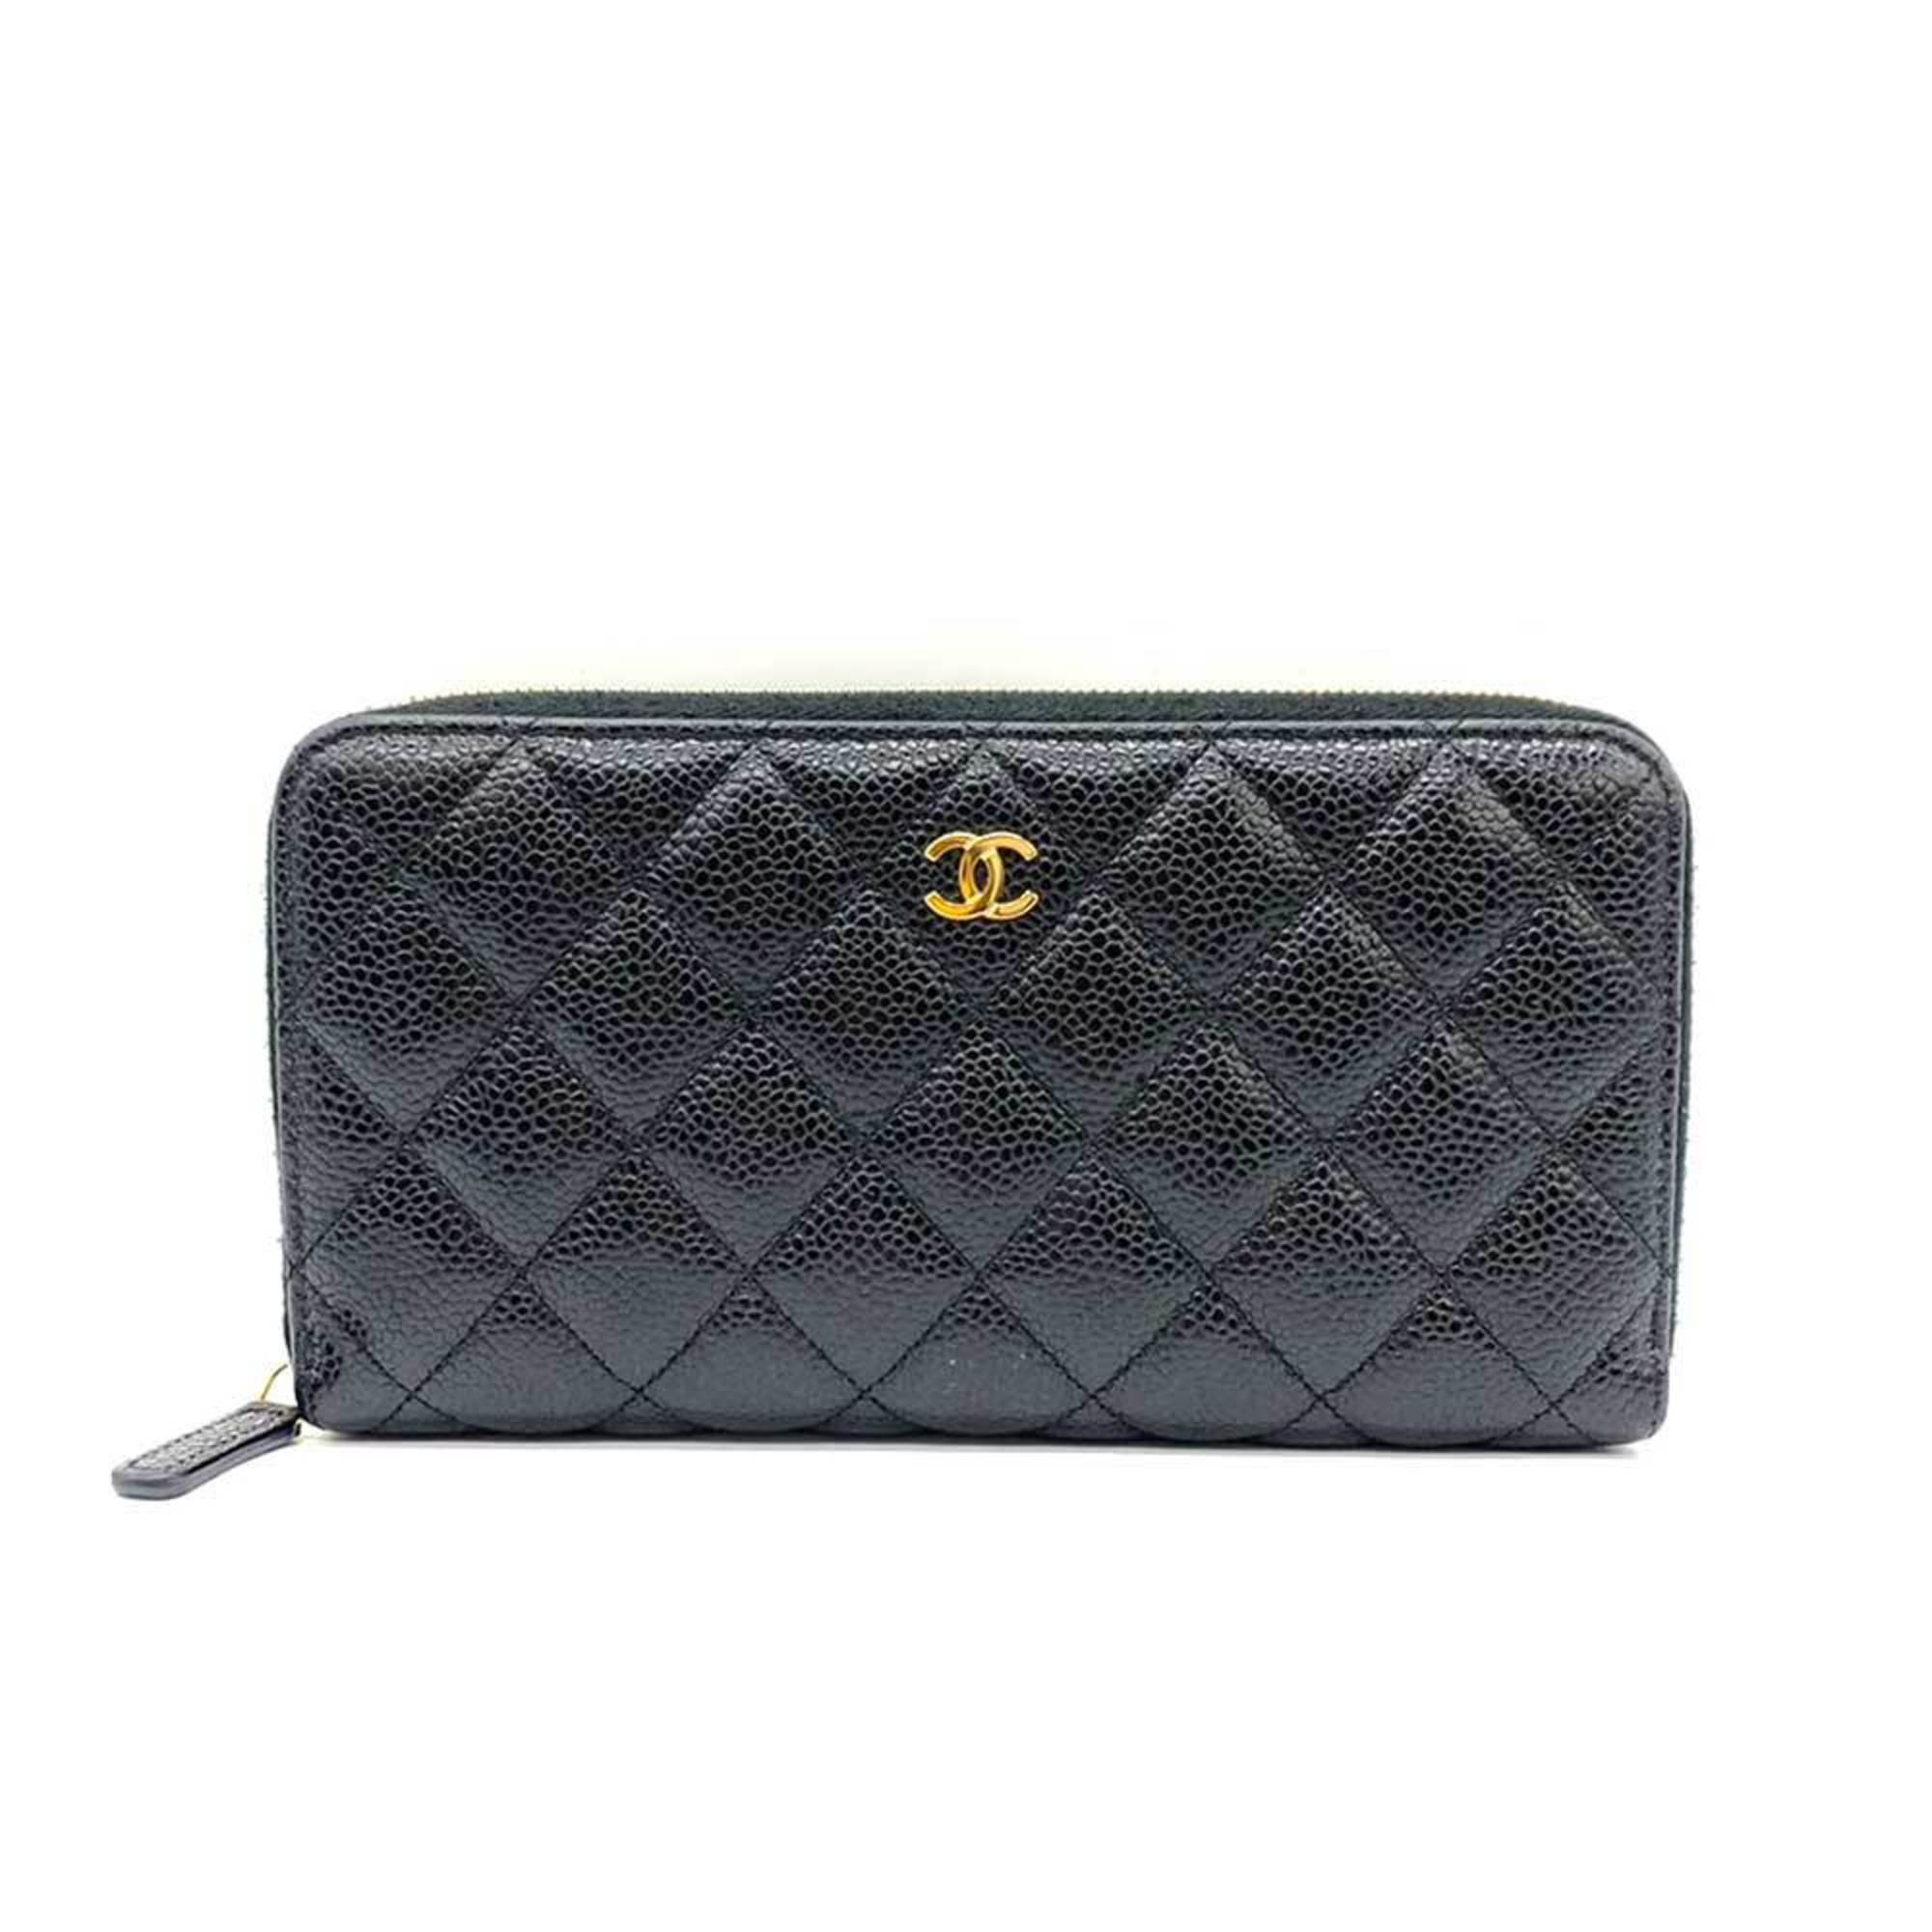 Chanel Wallet Classic Matelasse Long Round Black Zip Coco Mark Ladies Caviar Skin Leather AP0242 CHANEL